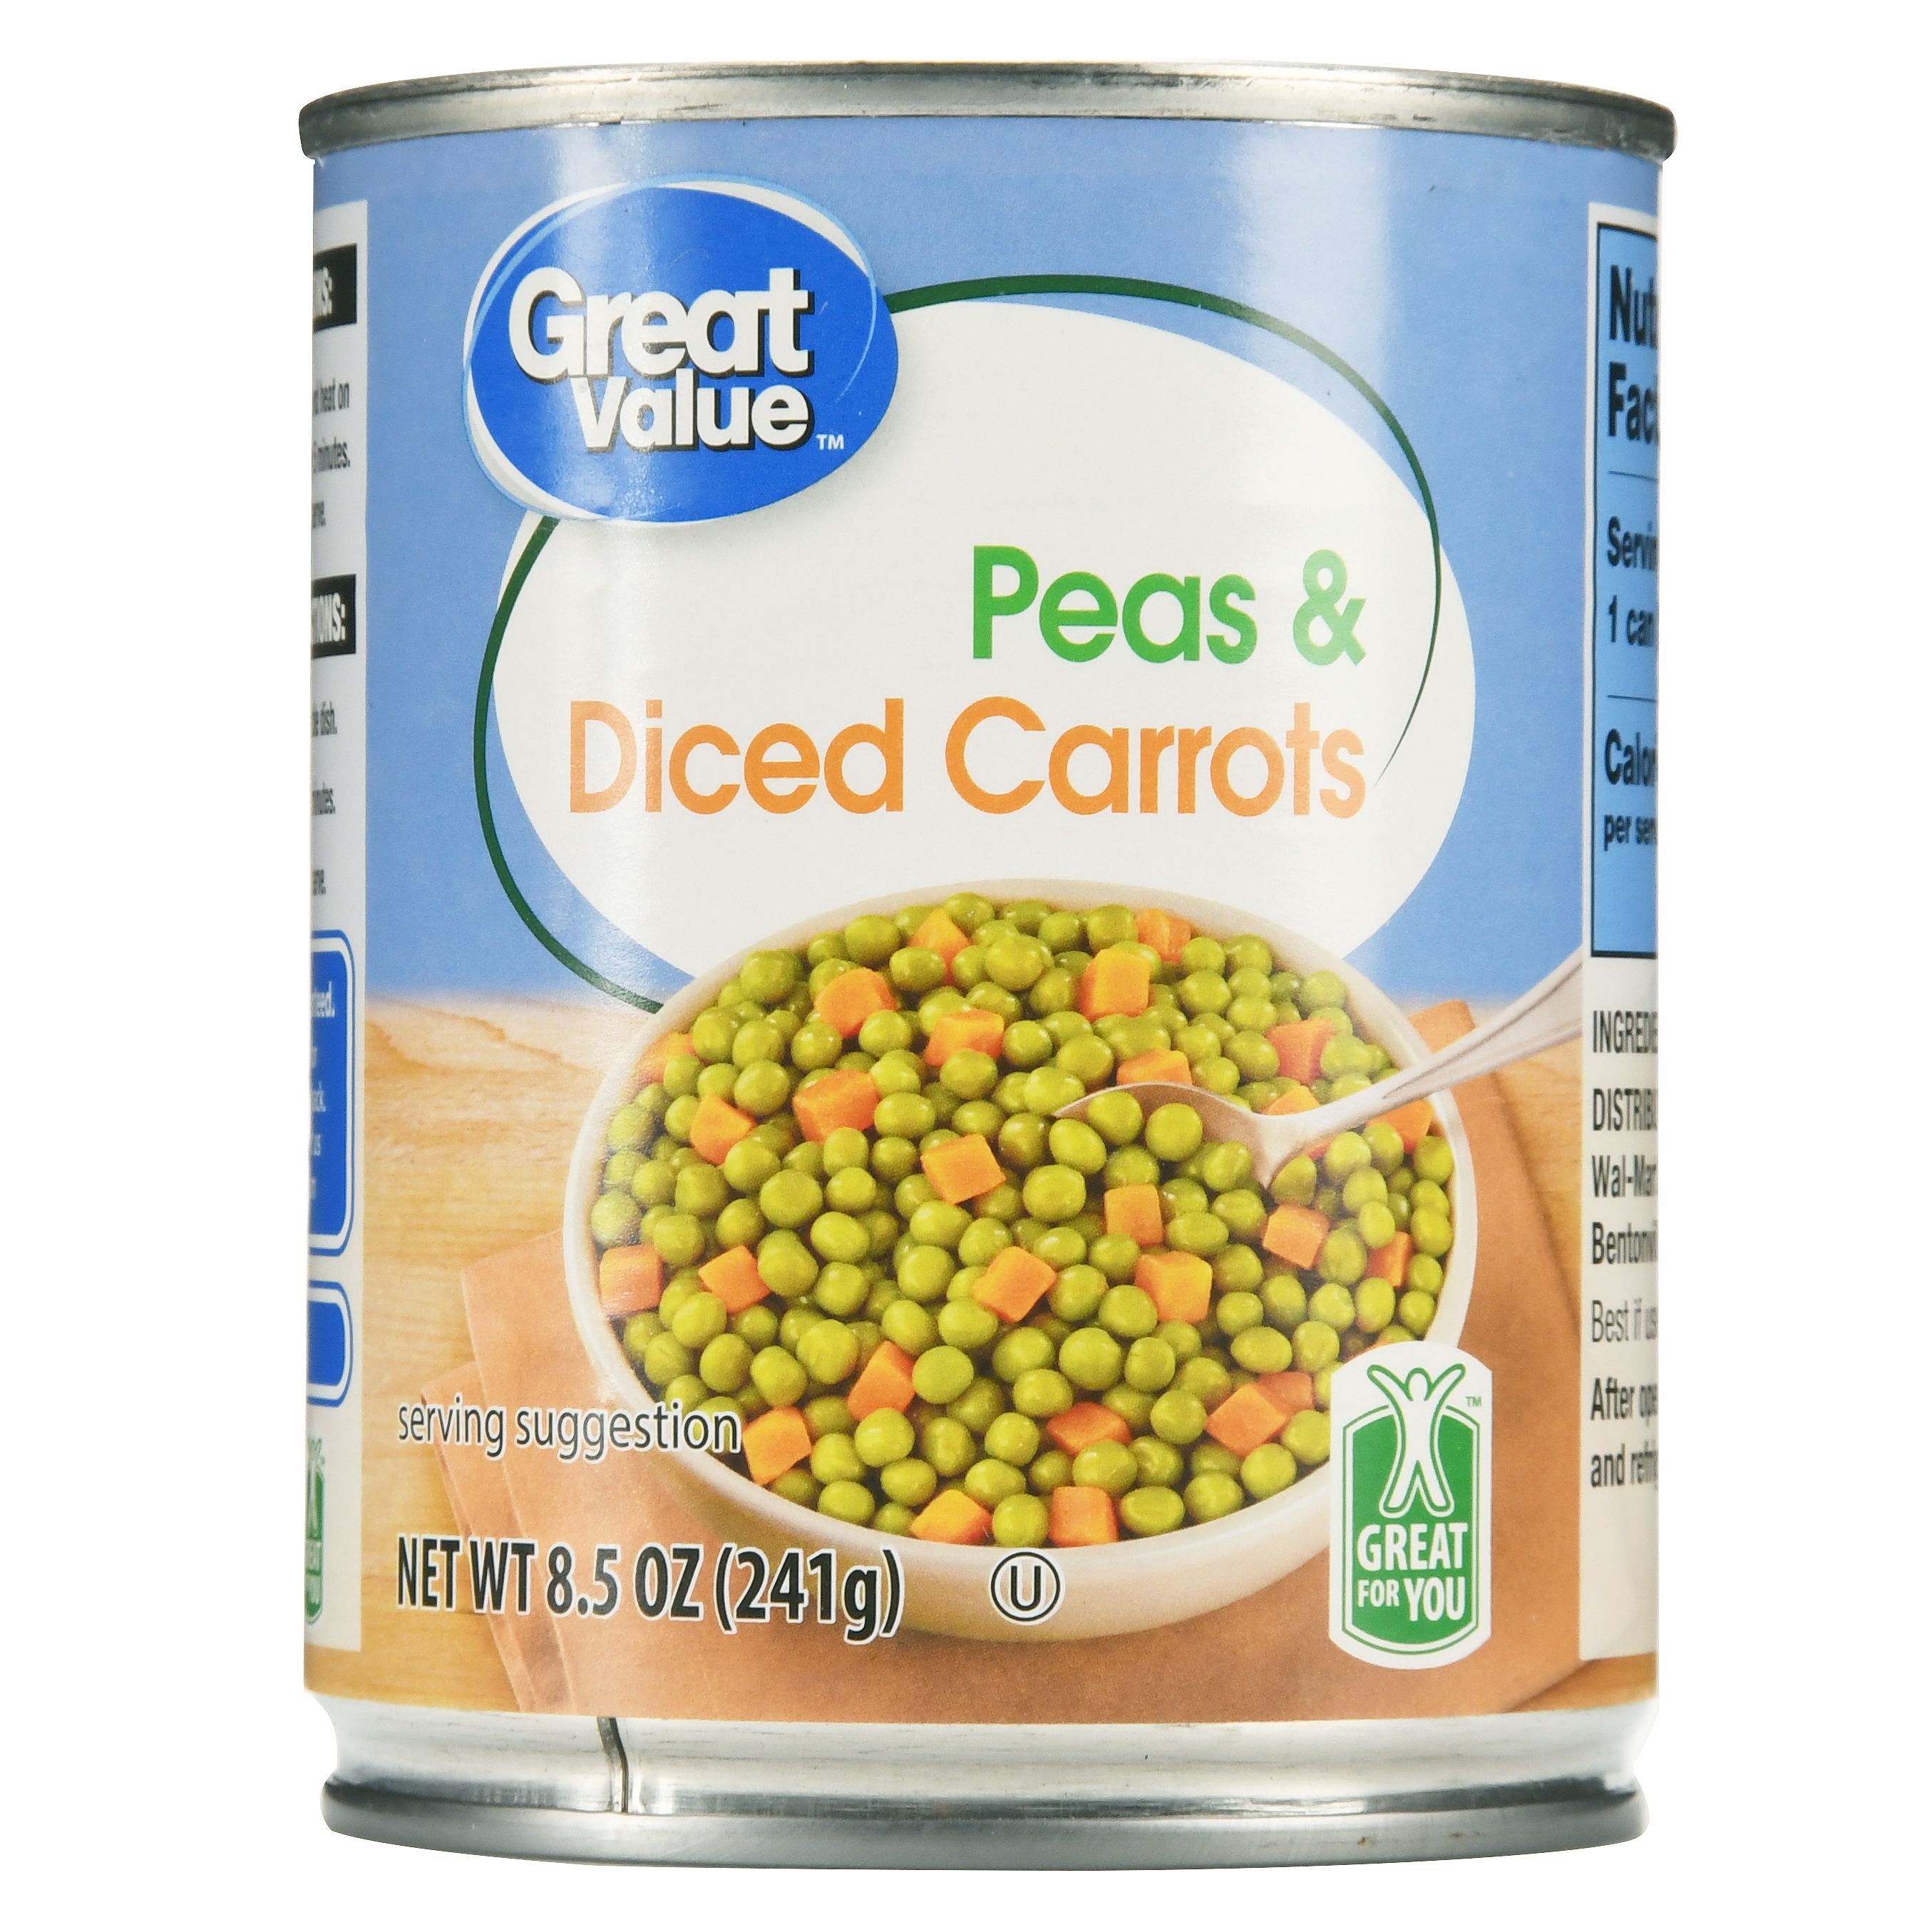 (3 Pack) Great Value Peas & Carrots, 8.5 Oz Image